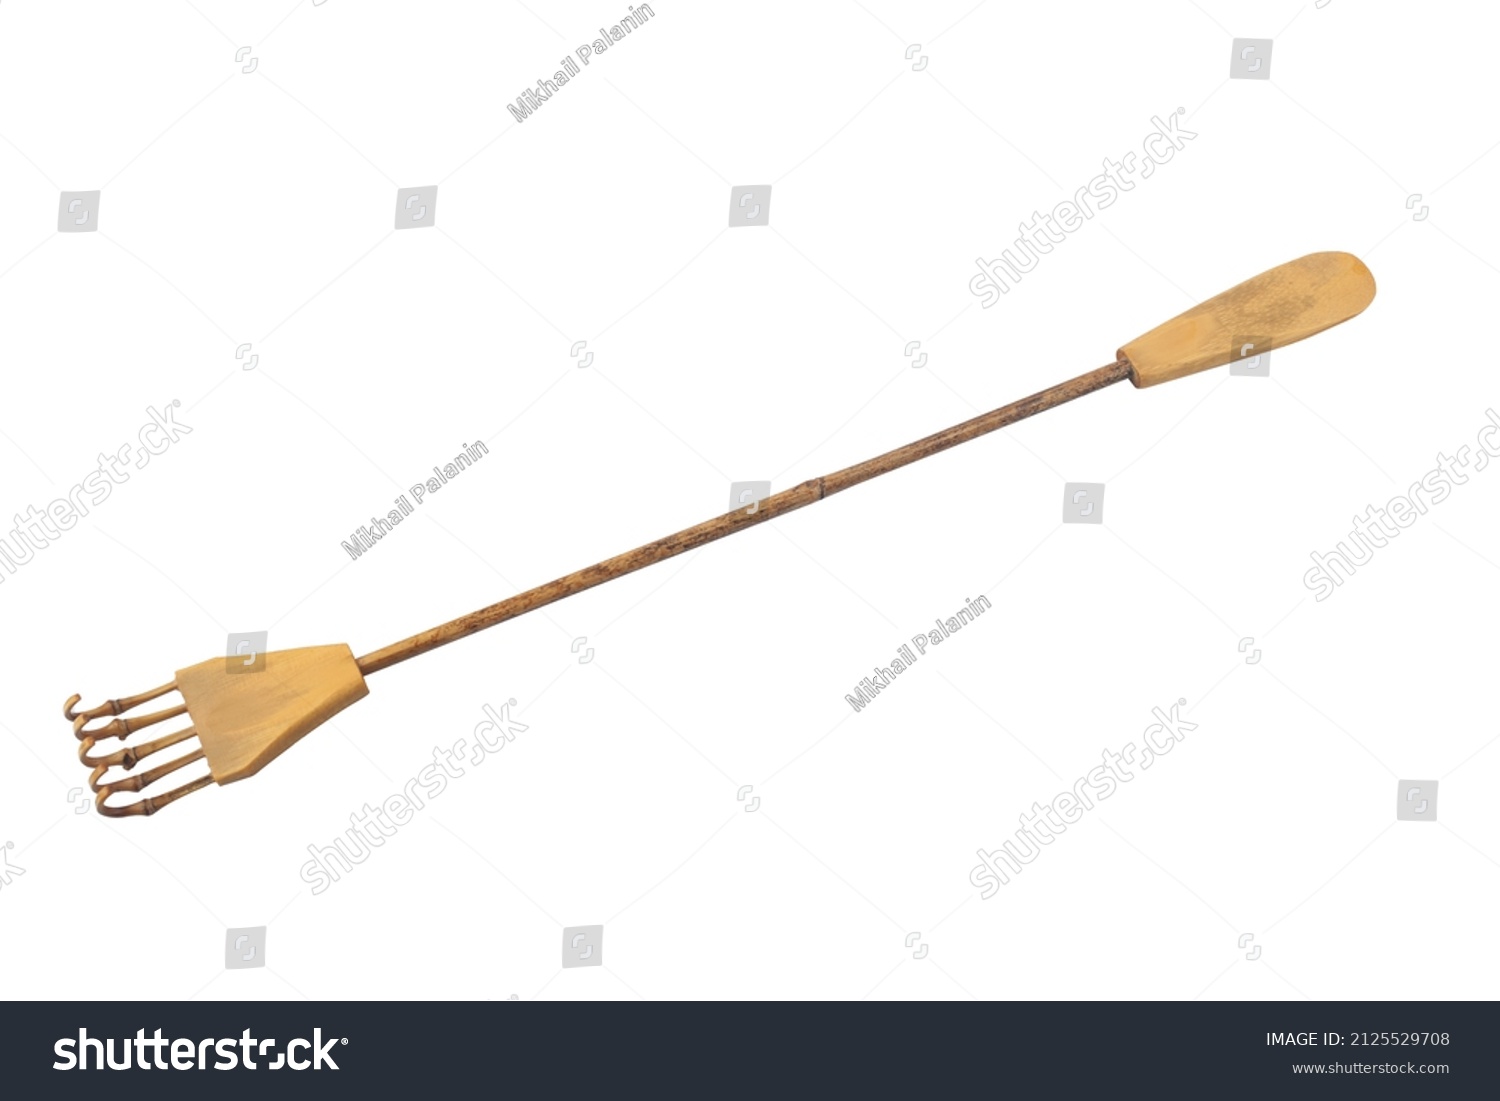 bamboo back scratcher is isolated on a white background. #2125529708